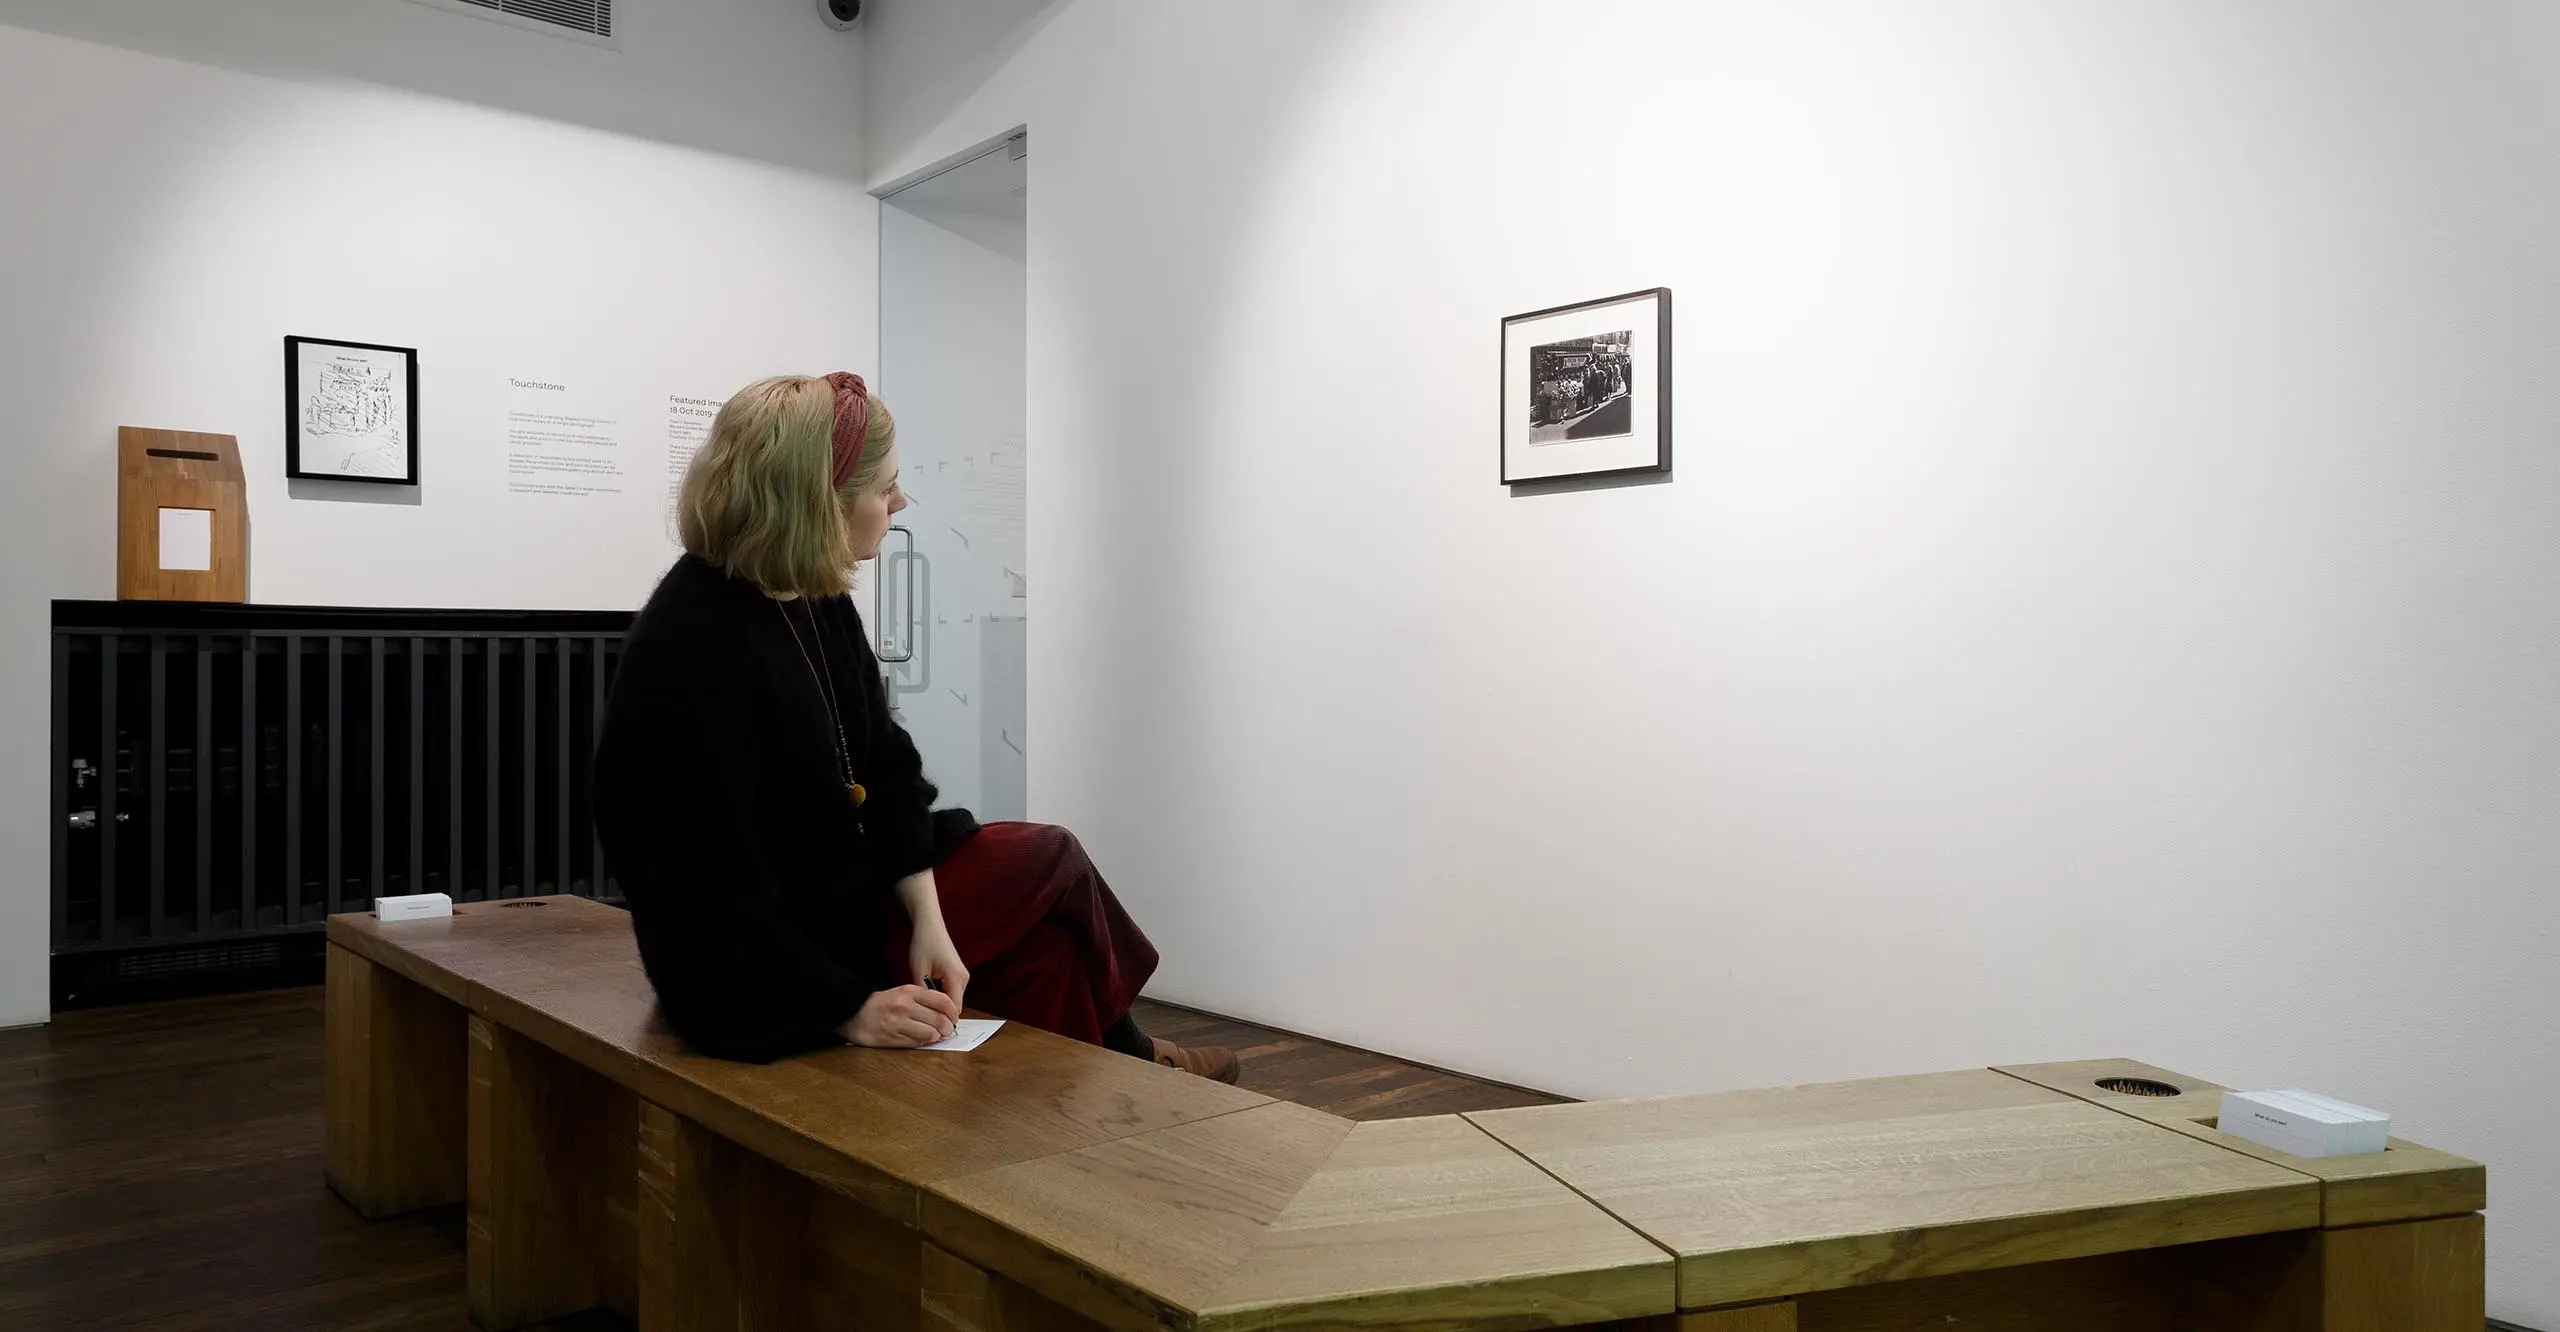 A visitor engages with an image by looking at it slowly over a period of time.